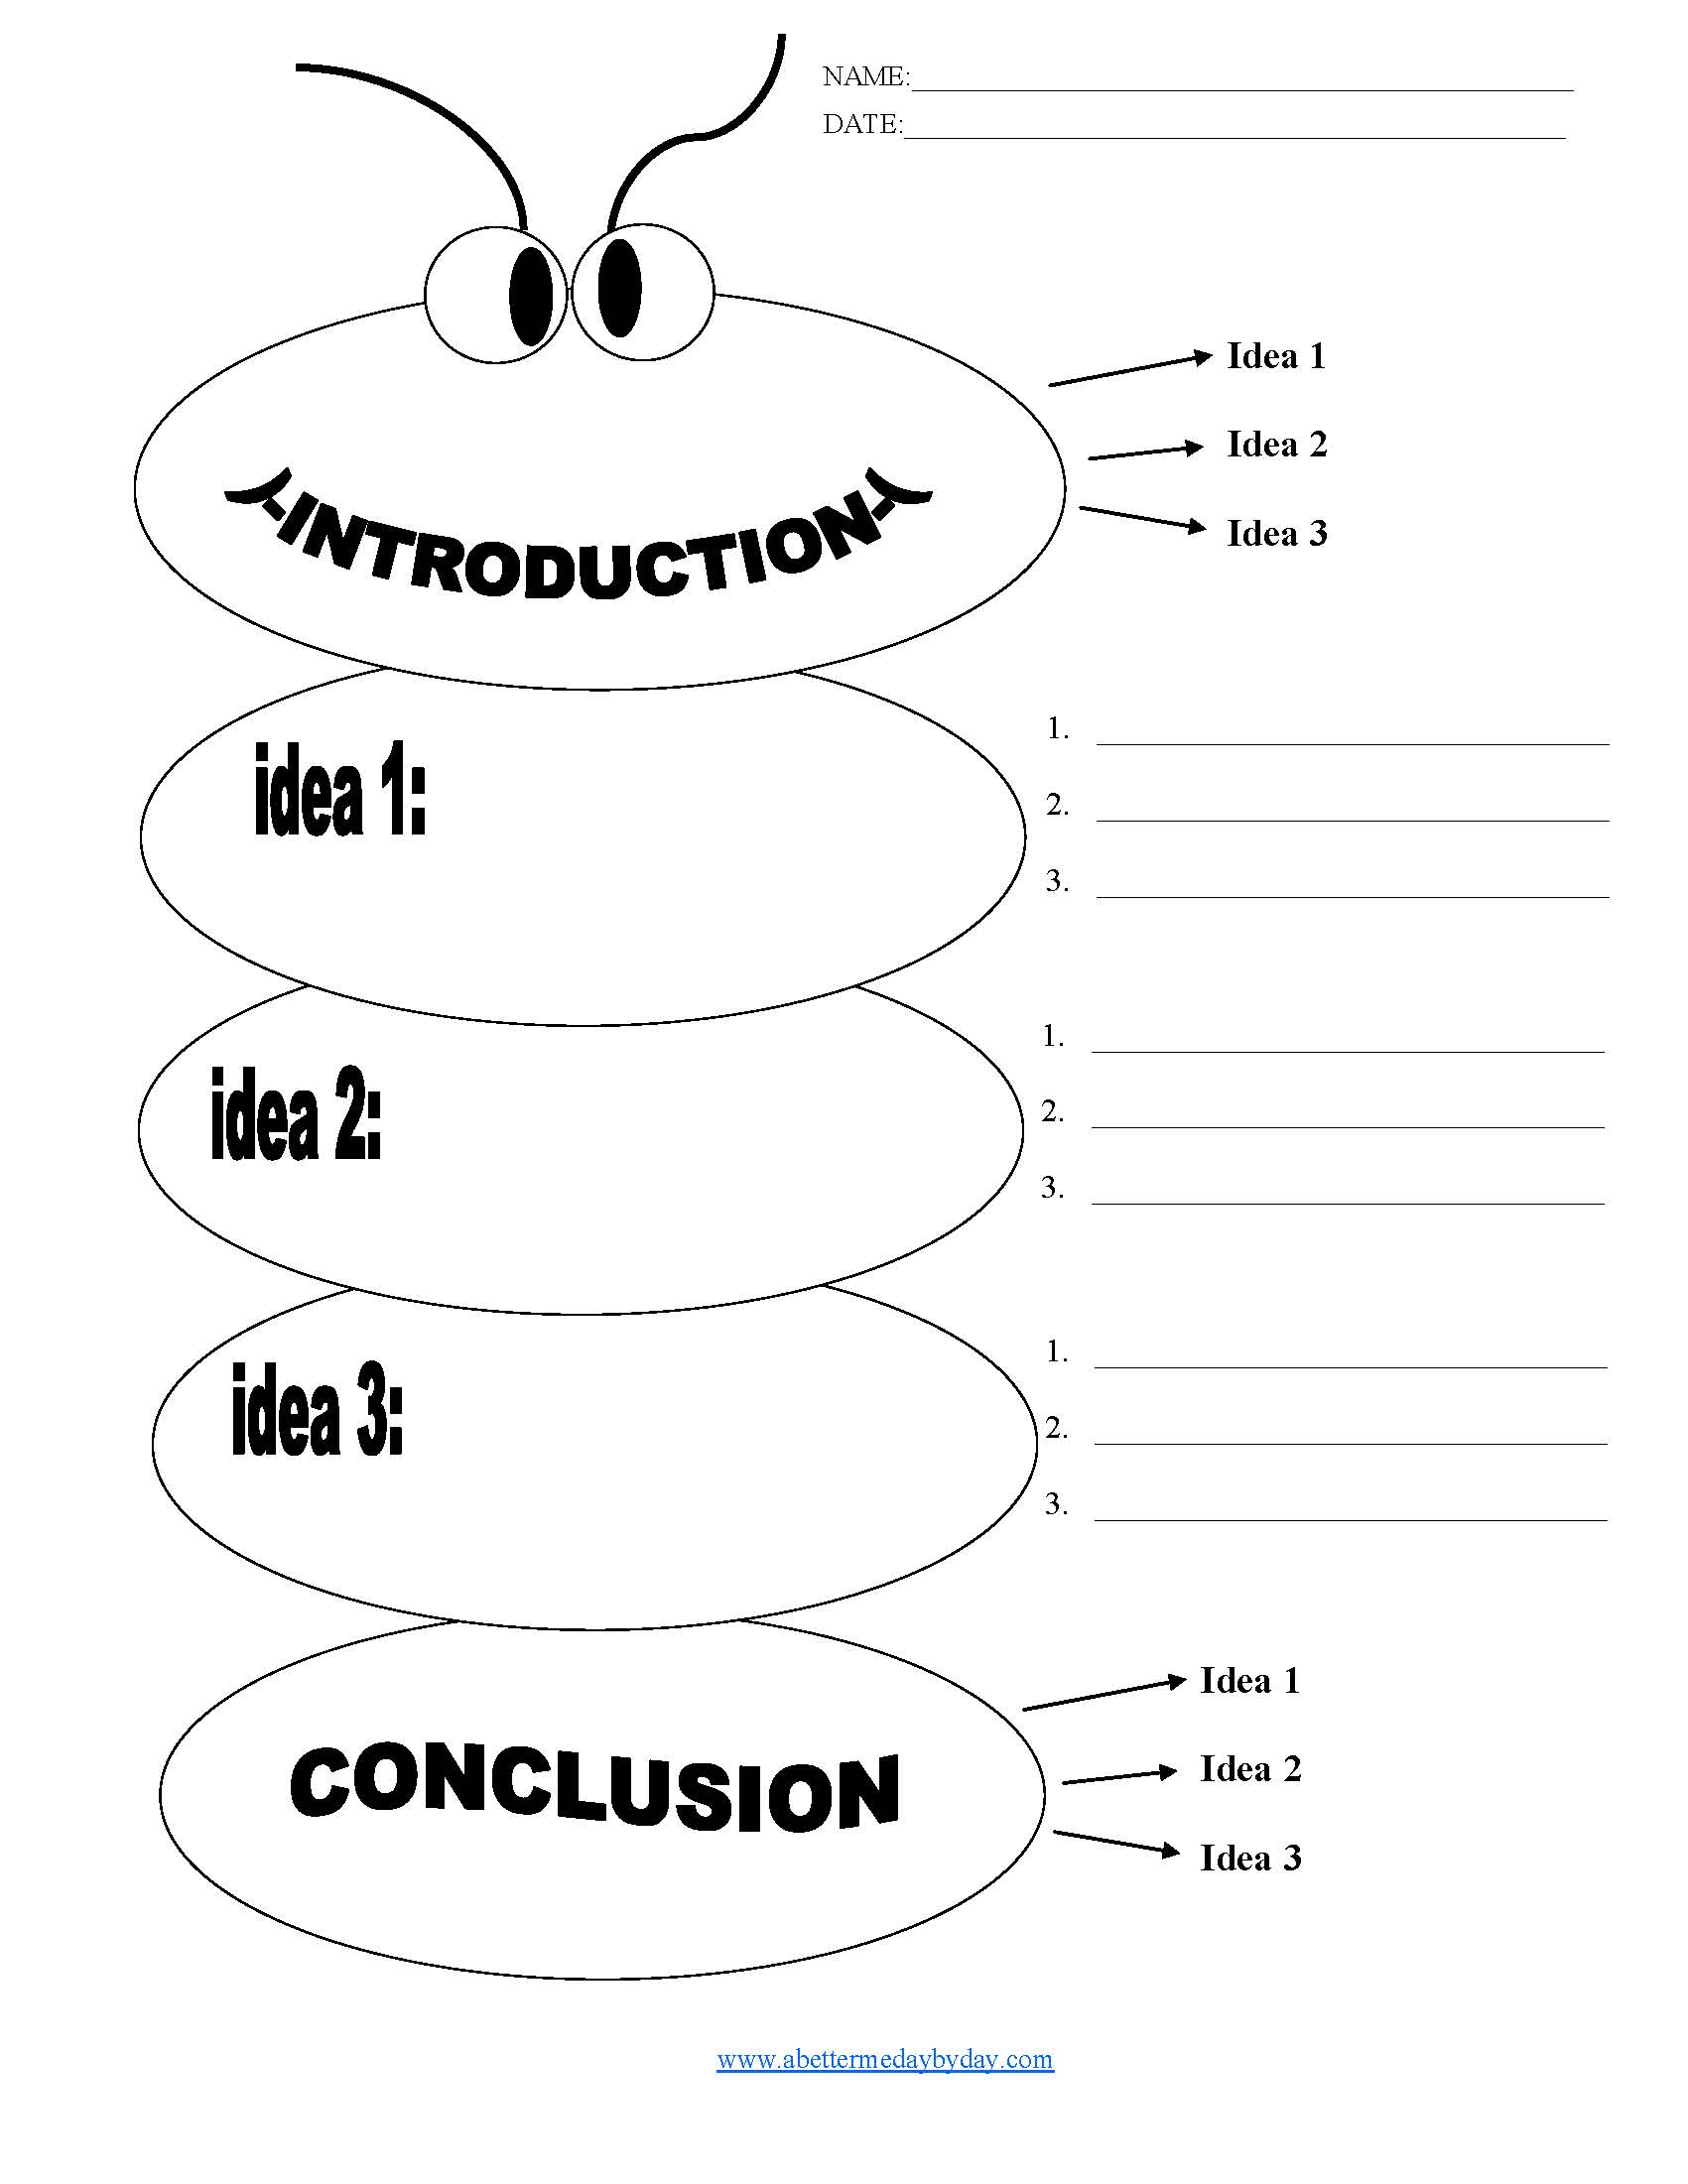 mla 8 outline example